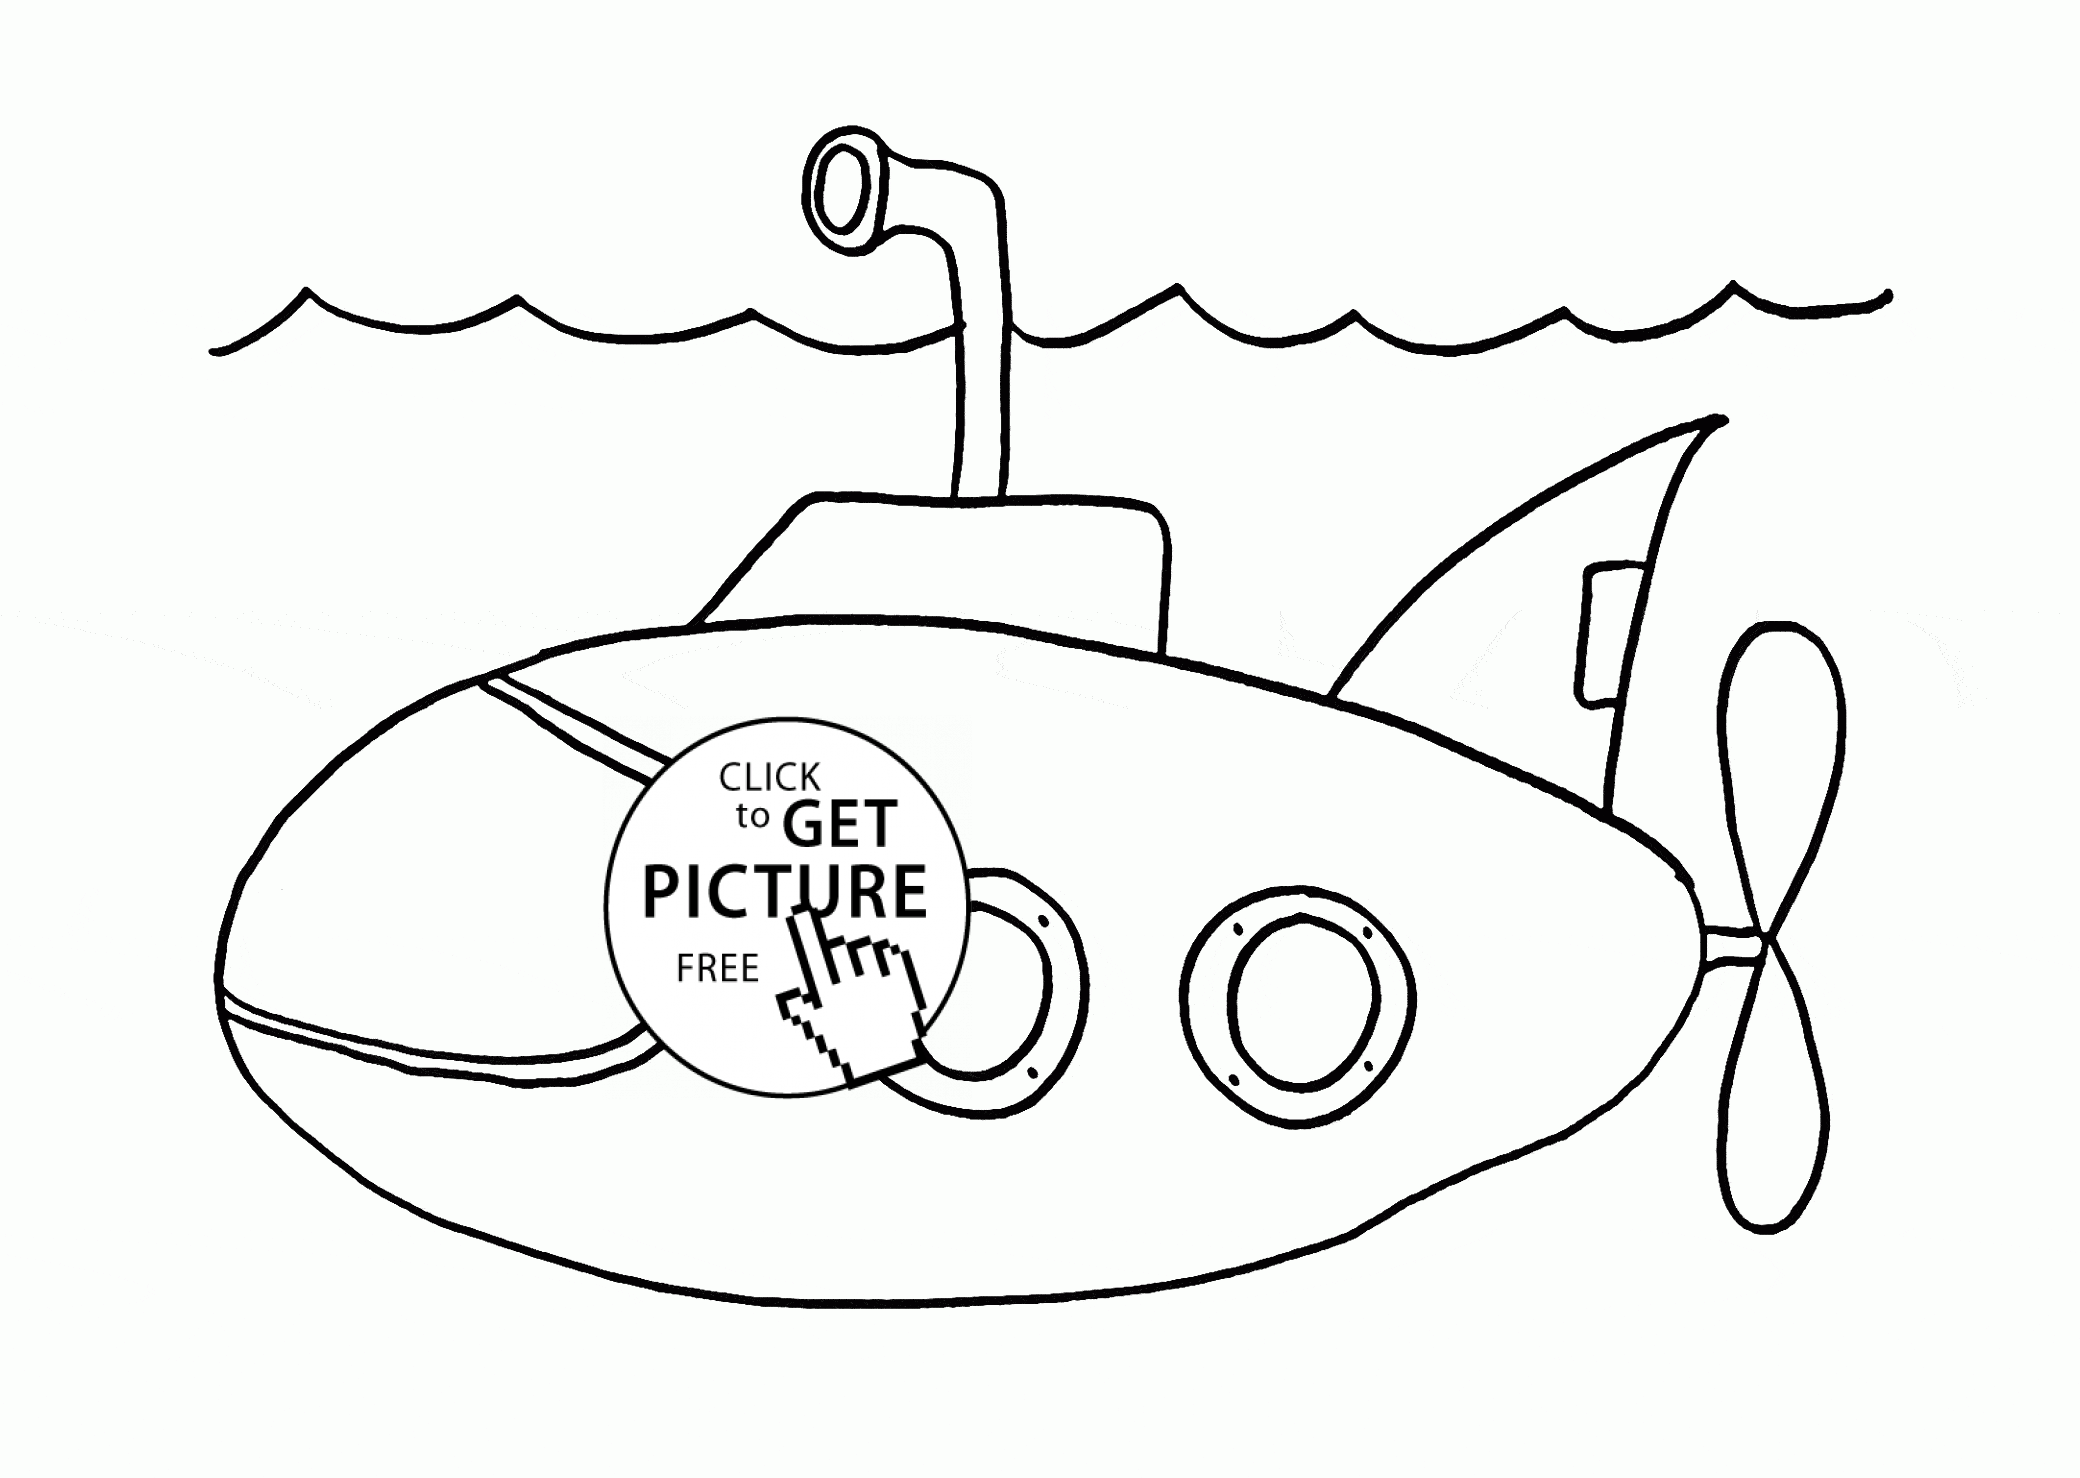 Submarine Coloring Pages To Print - Coloring Home